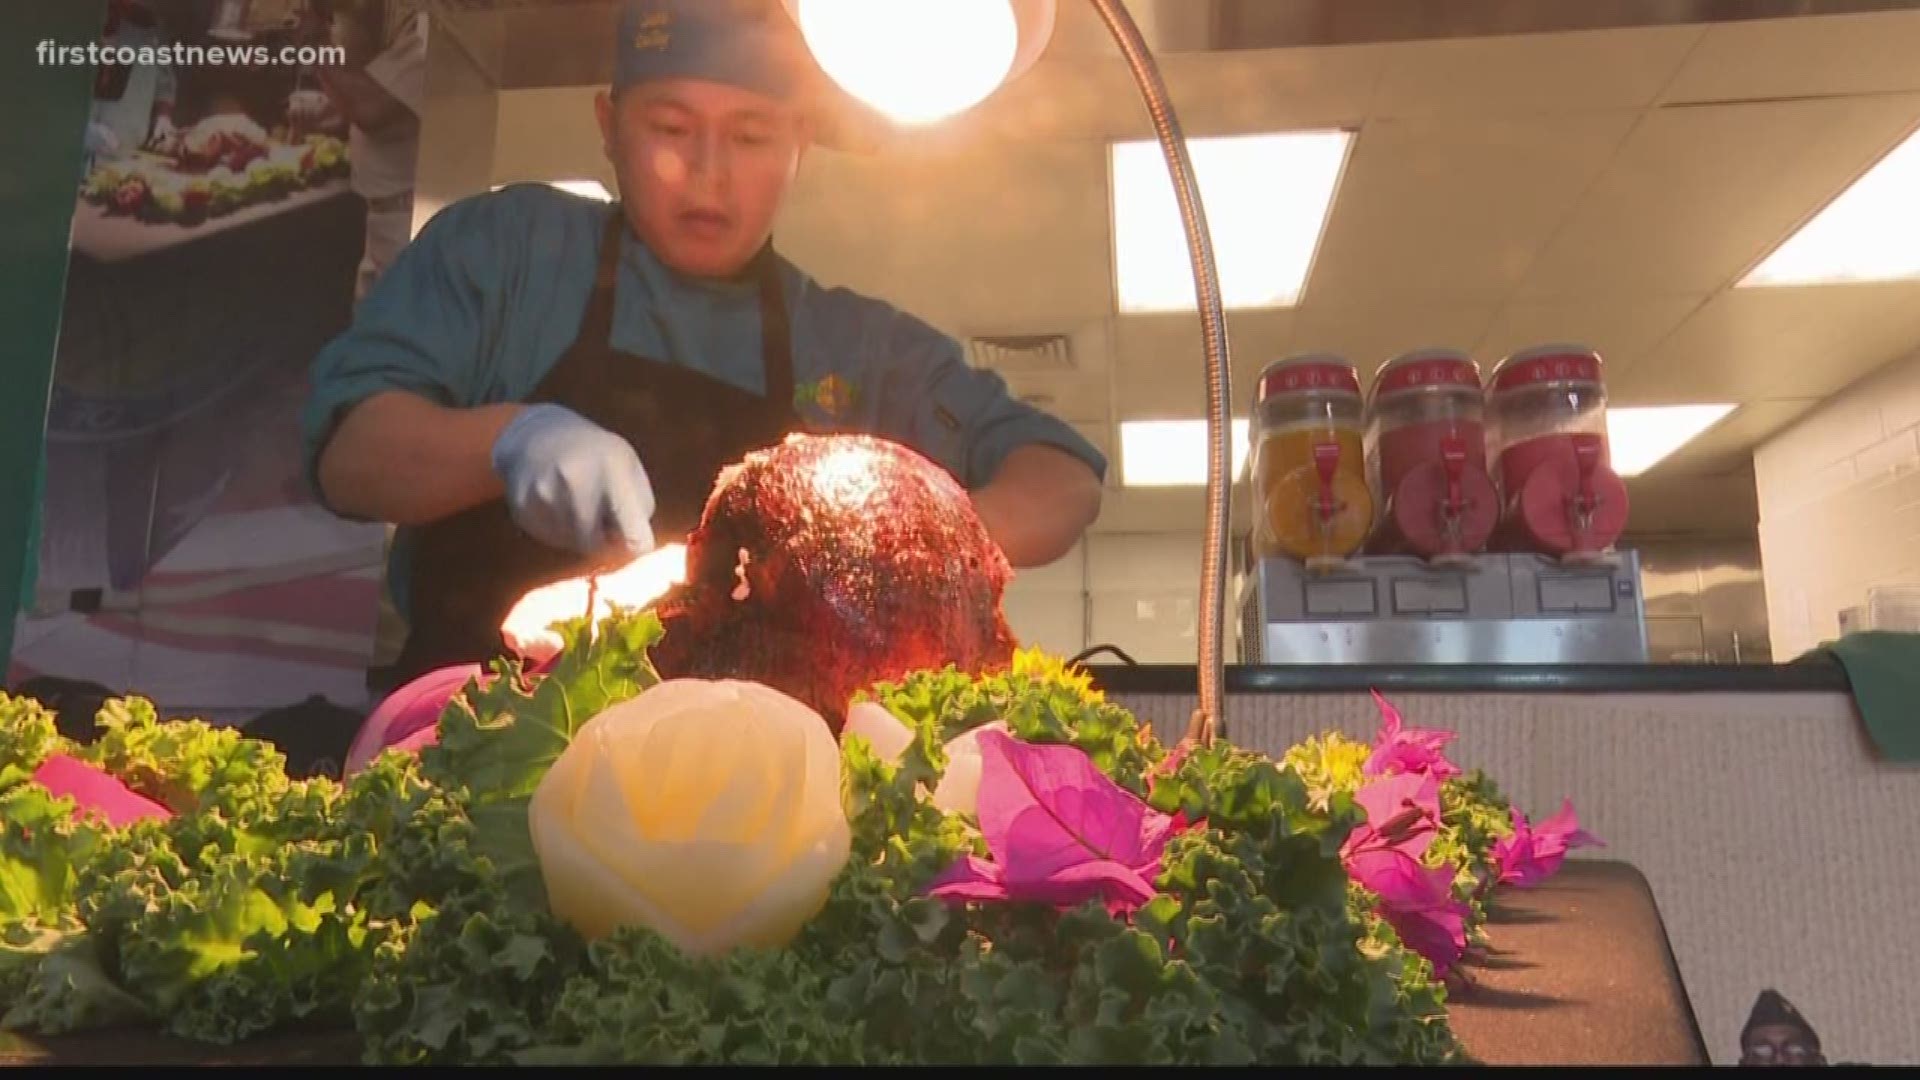 “Thanksgiving is one of those special holidays and a lot of sailors don’t get a chance to go home, so they come here,” food service officer Michael Carter said.